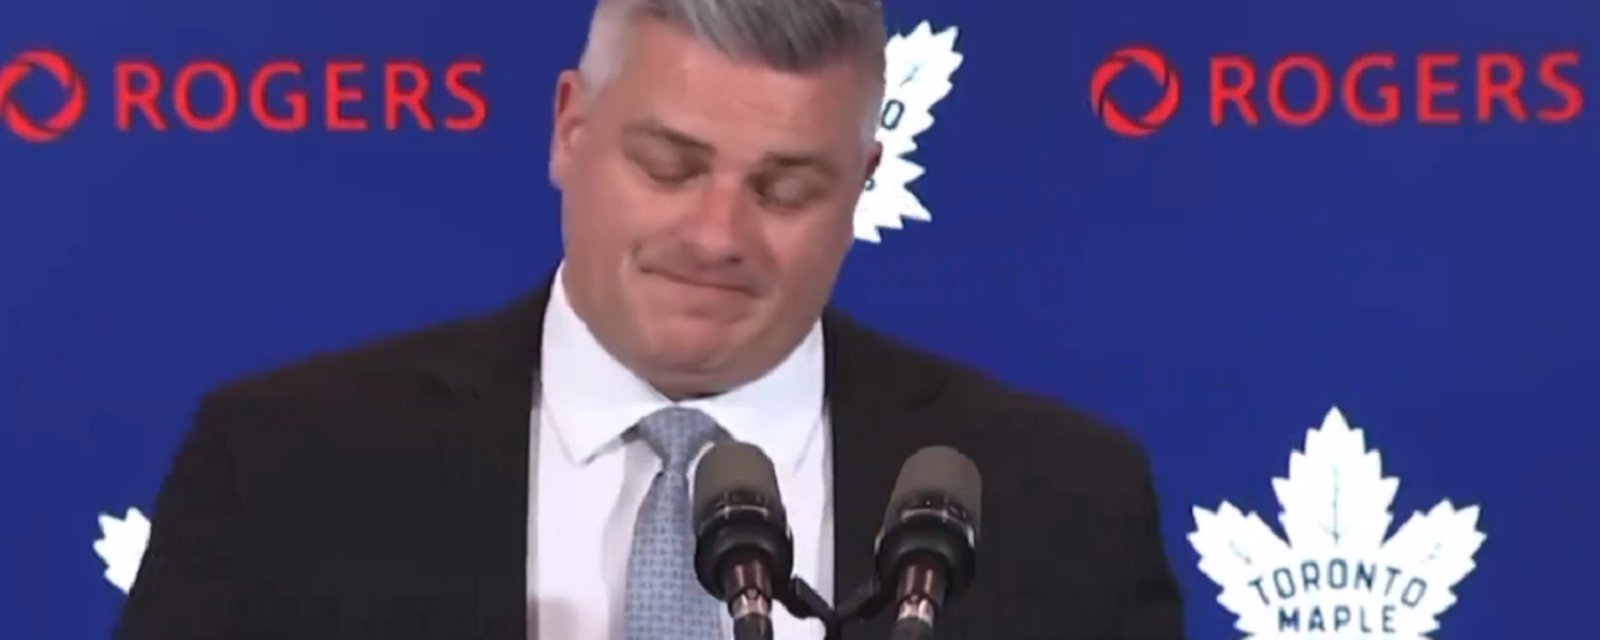 Keefe makes controversial comments in response to Rielly cross-check.